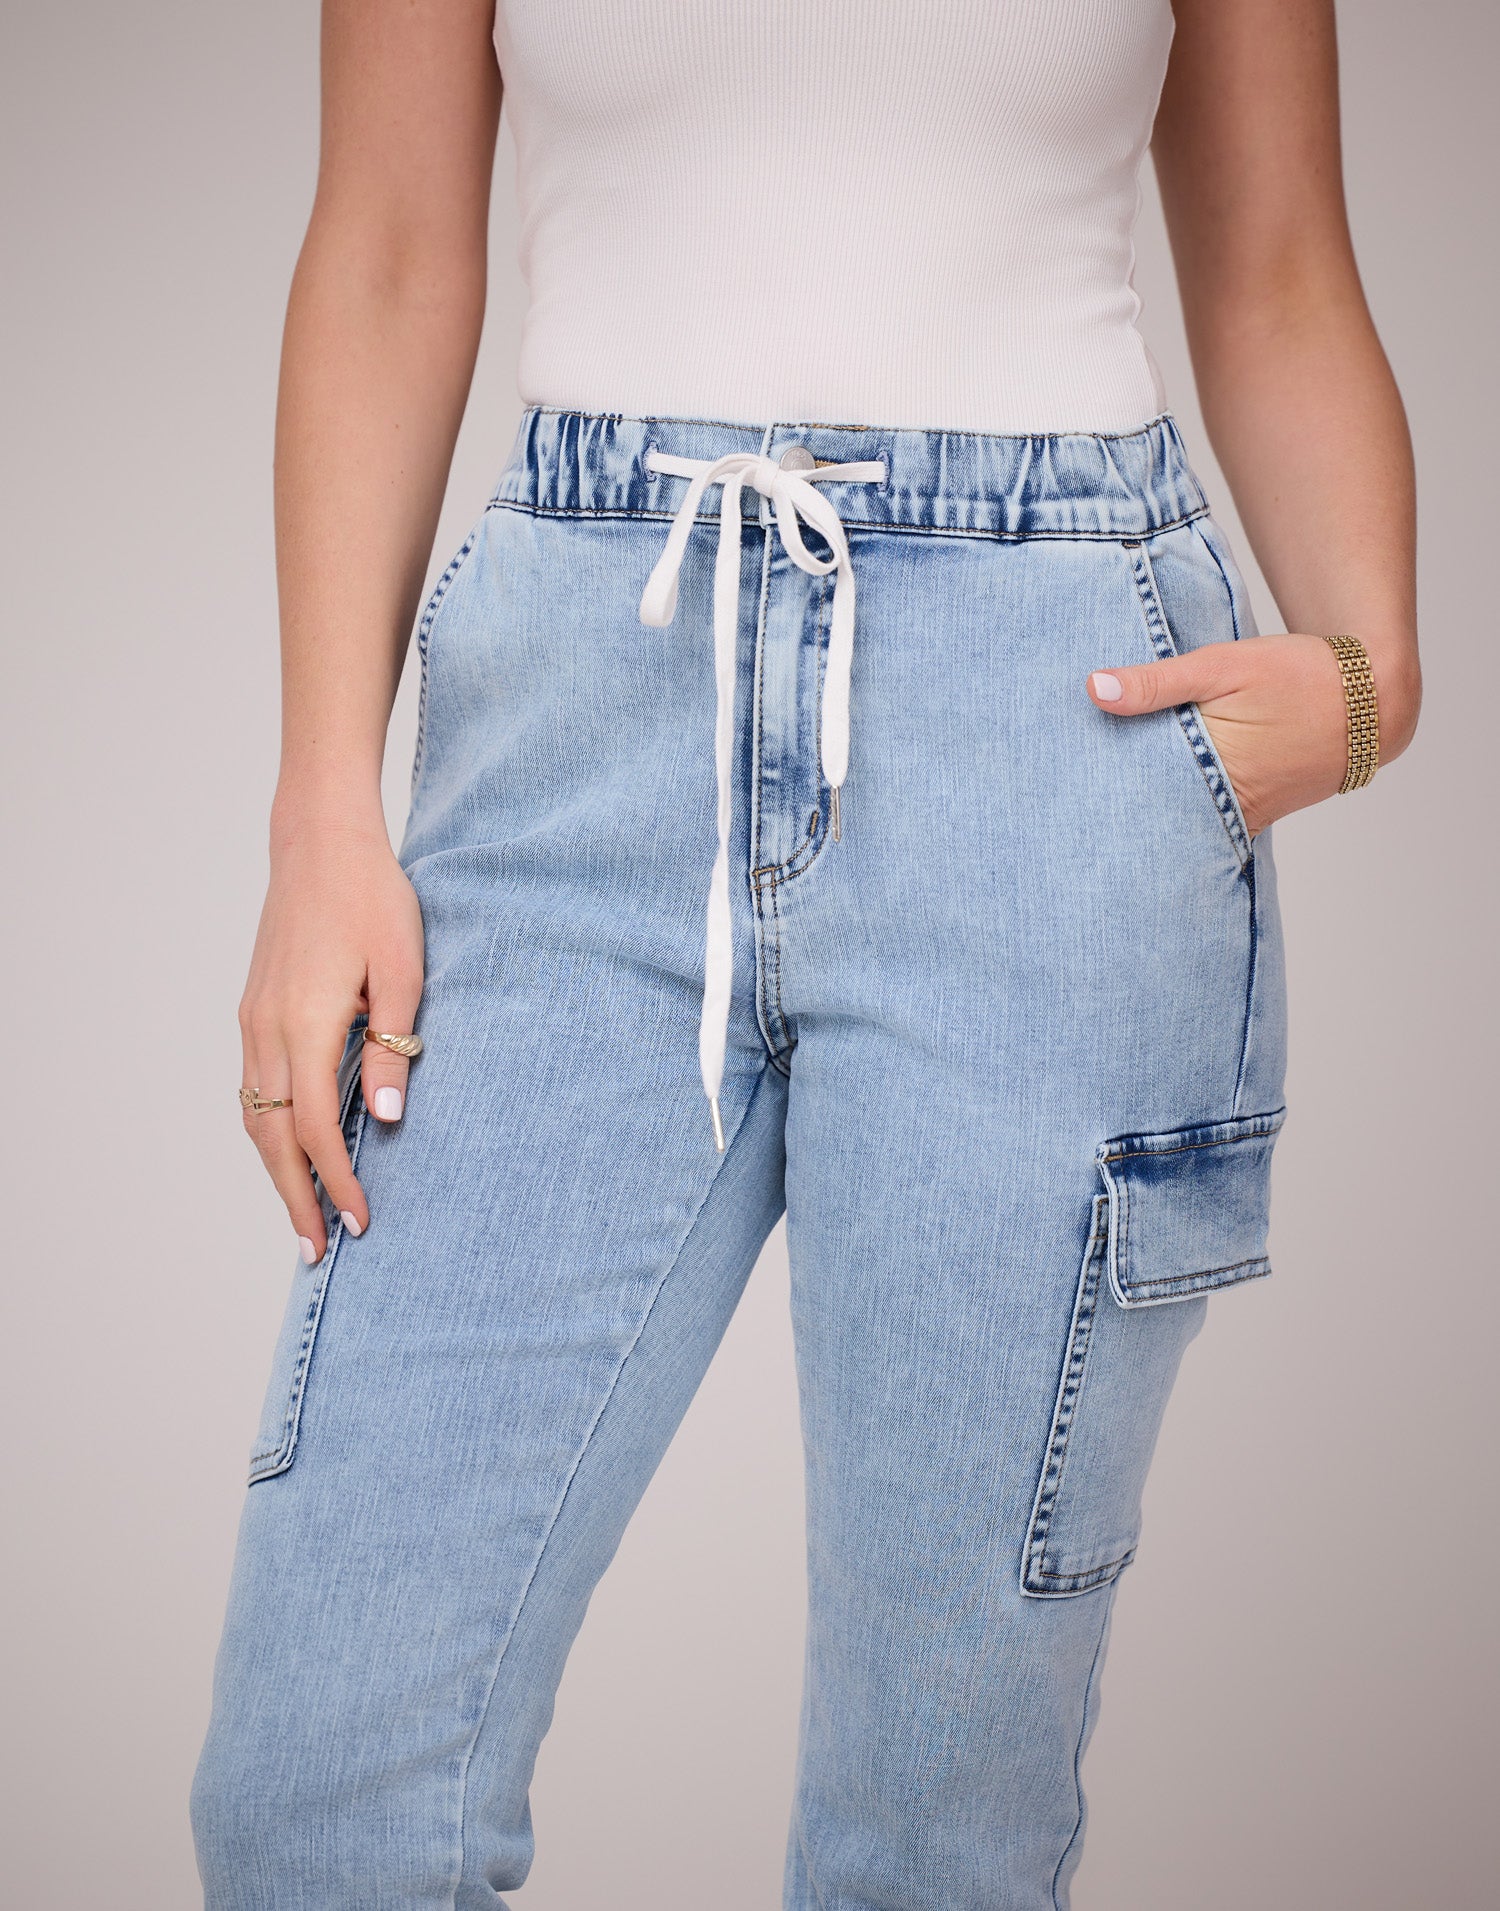 Second Denim Yoga Jeans High Rise Relaxed Fit Cargo Style Jeans With Fly Front and Drawstring Detail